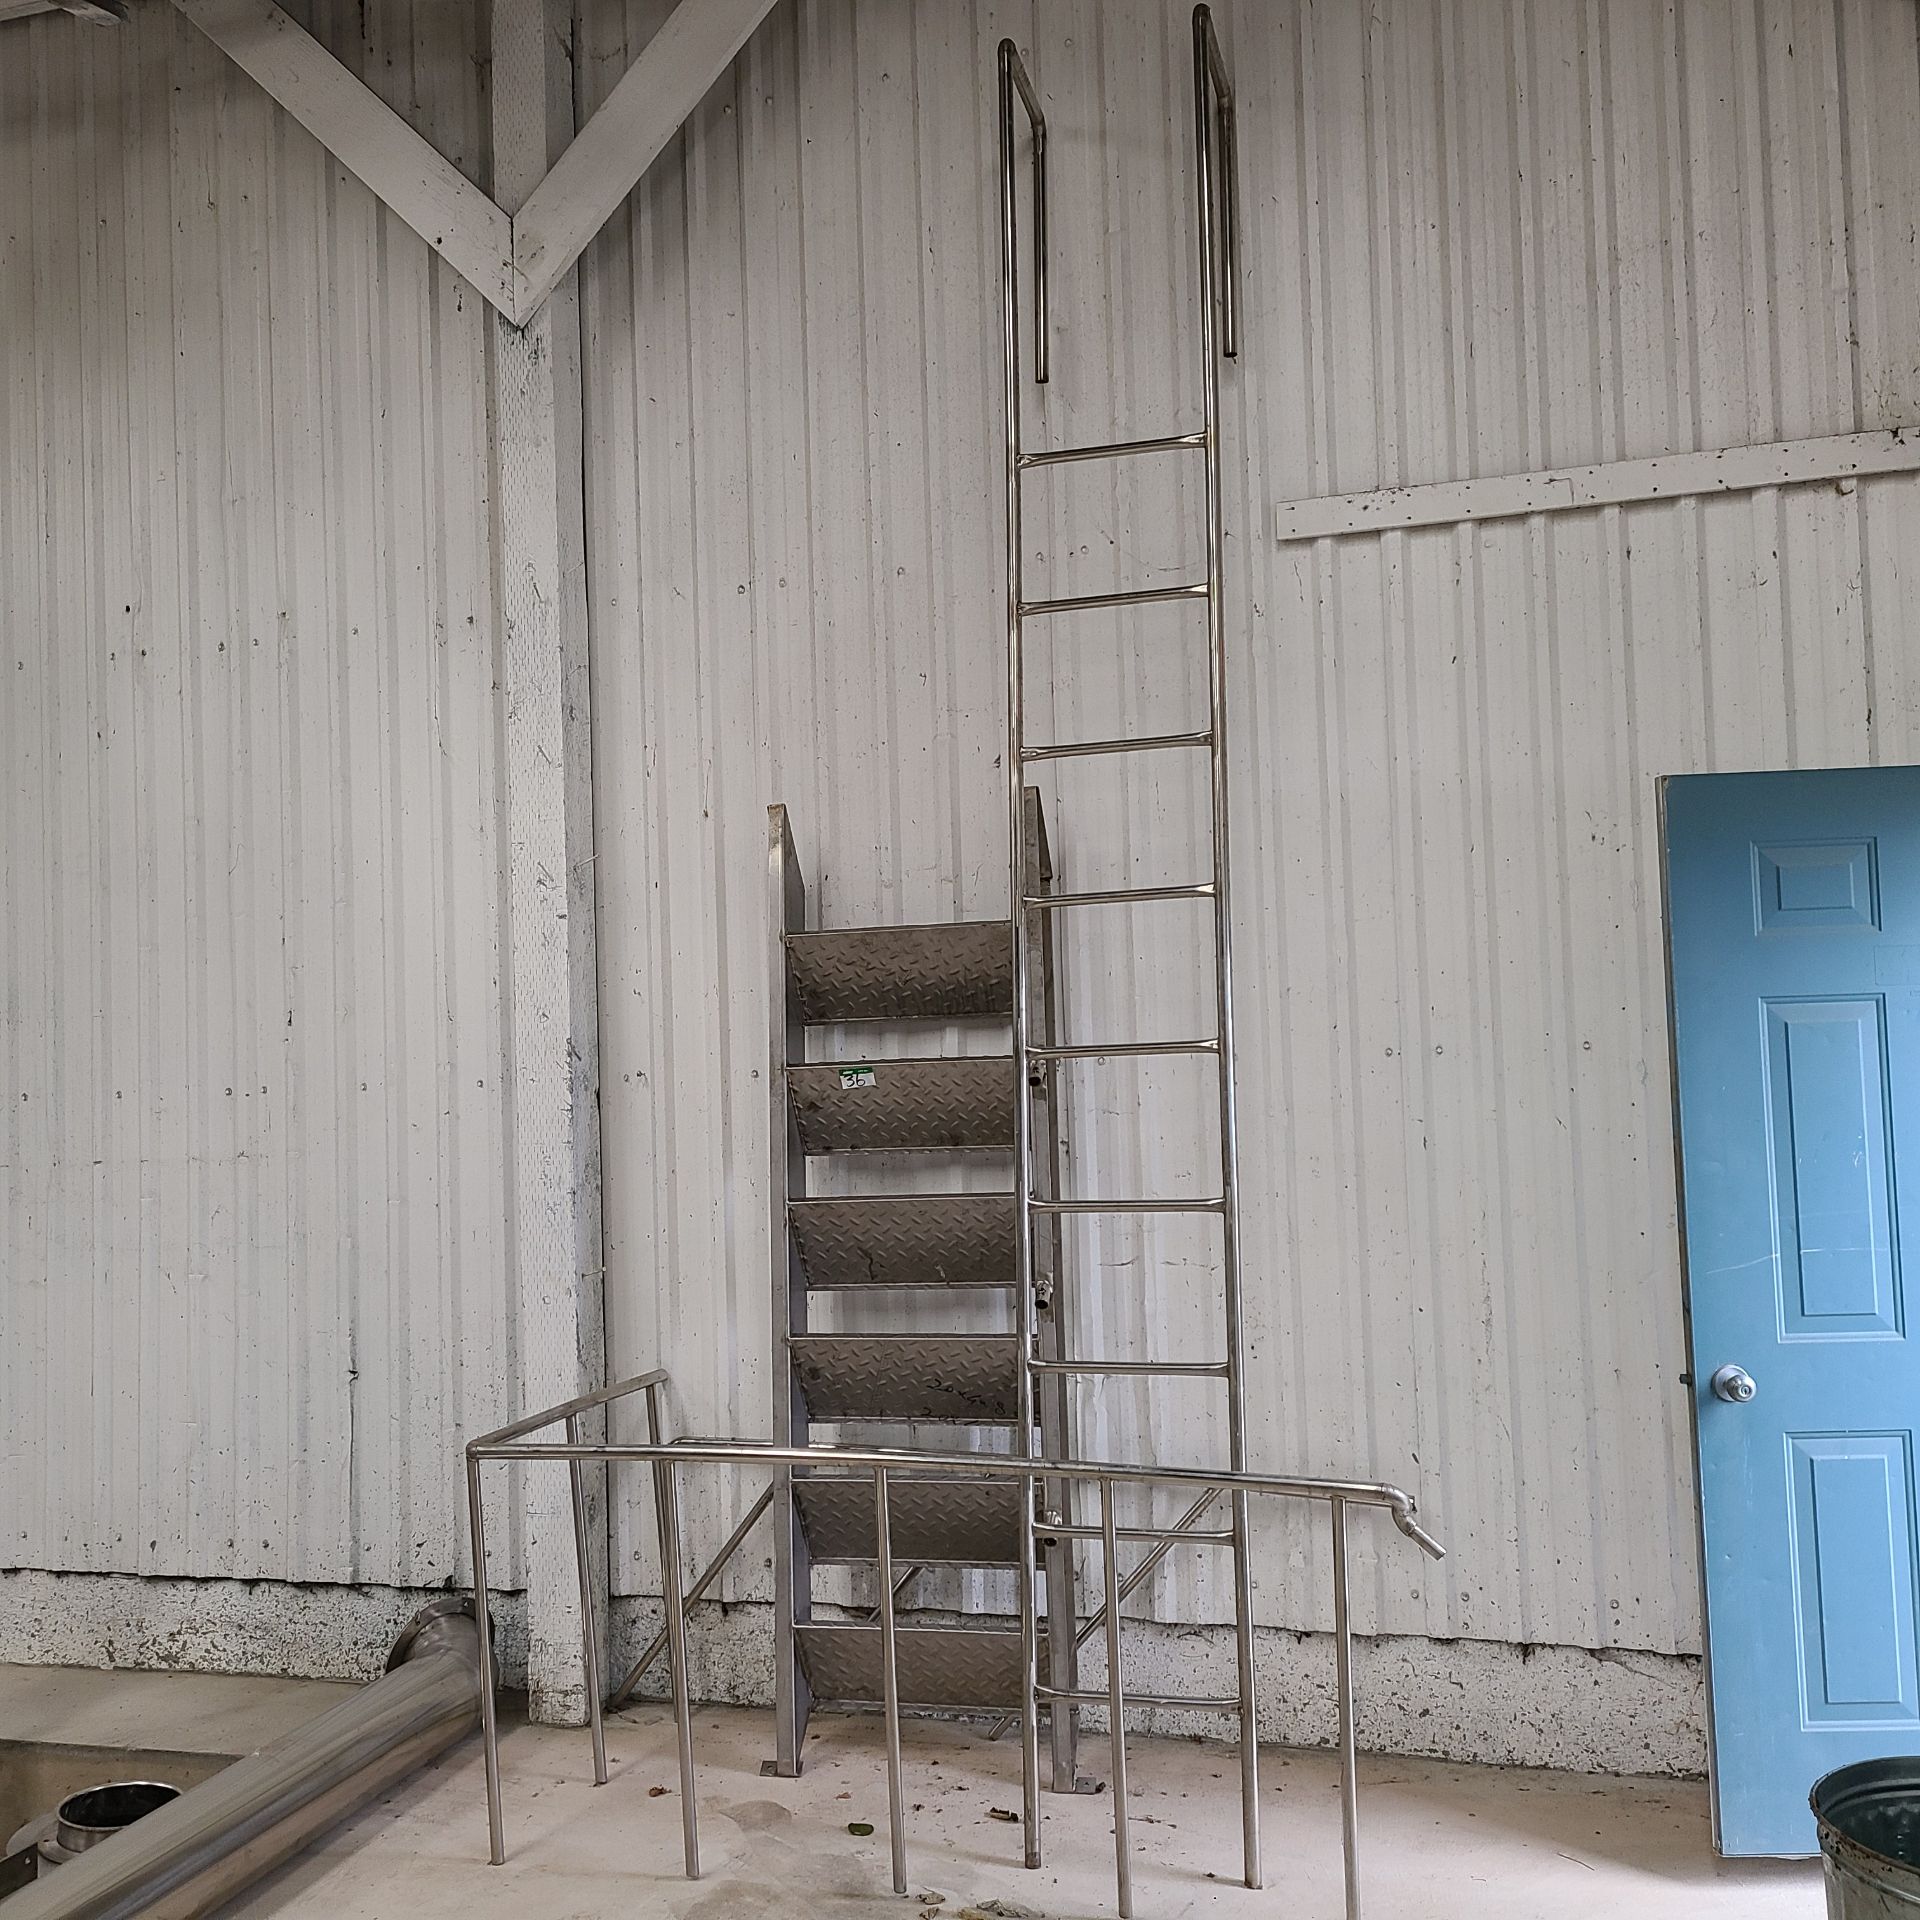 SS 6 STEP STAIRWAY, SS TUBULAR LADDER, 115 IN. FROM BOTTOM TO TOP STEP, SS L SHAPE RAIL 6 FT. L x